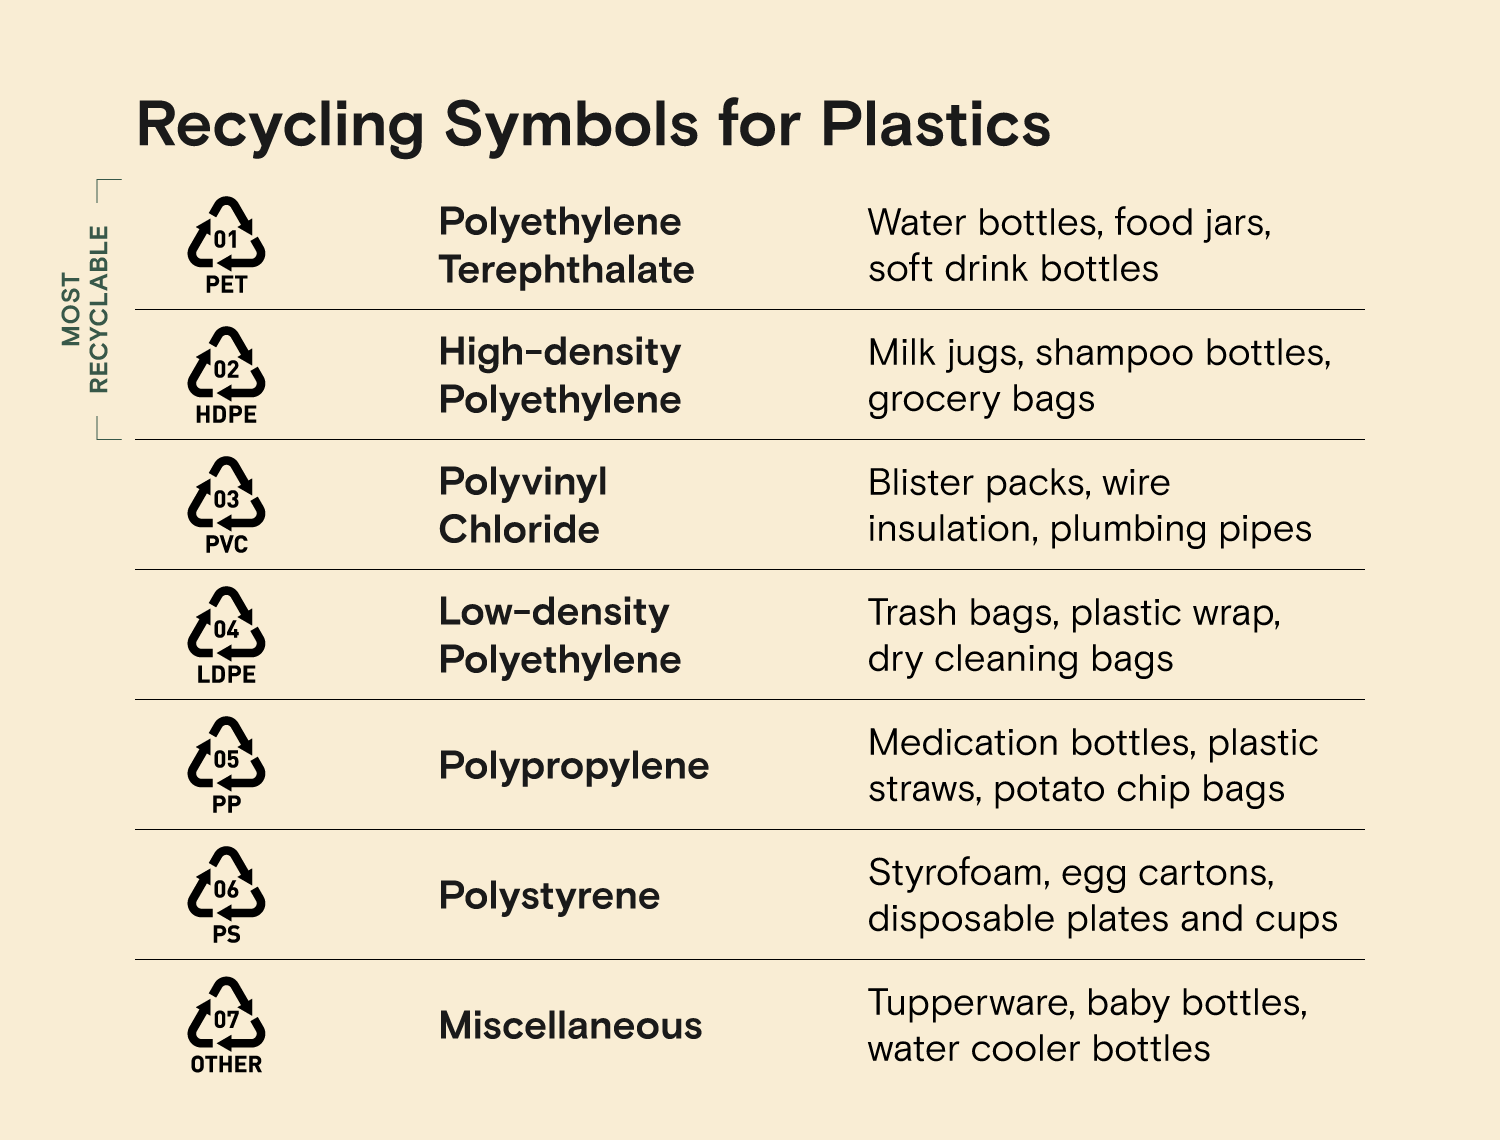 plastic recycling symbols chart chasing arrows triangle